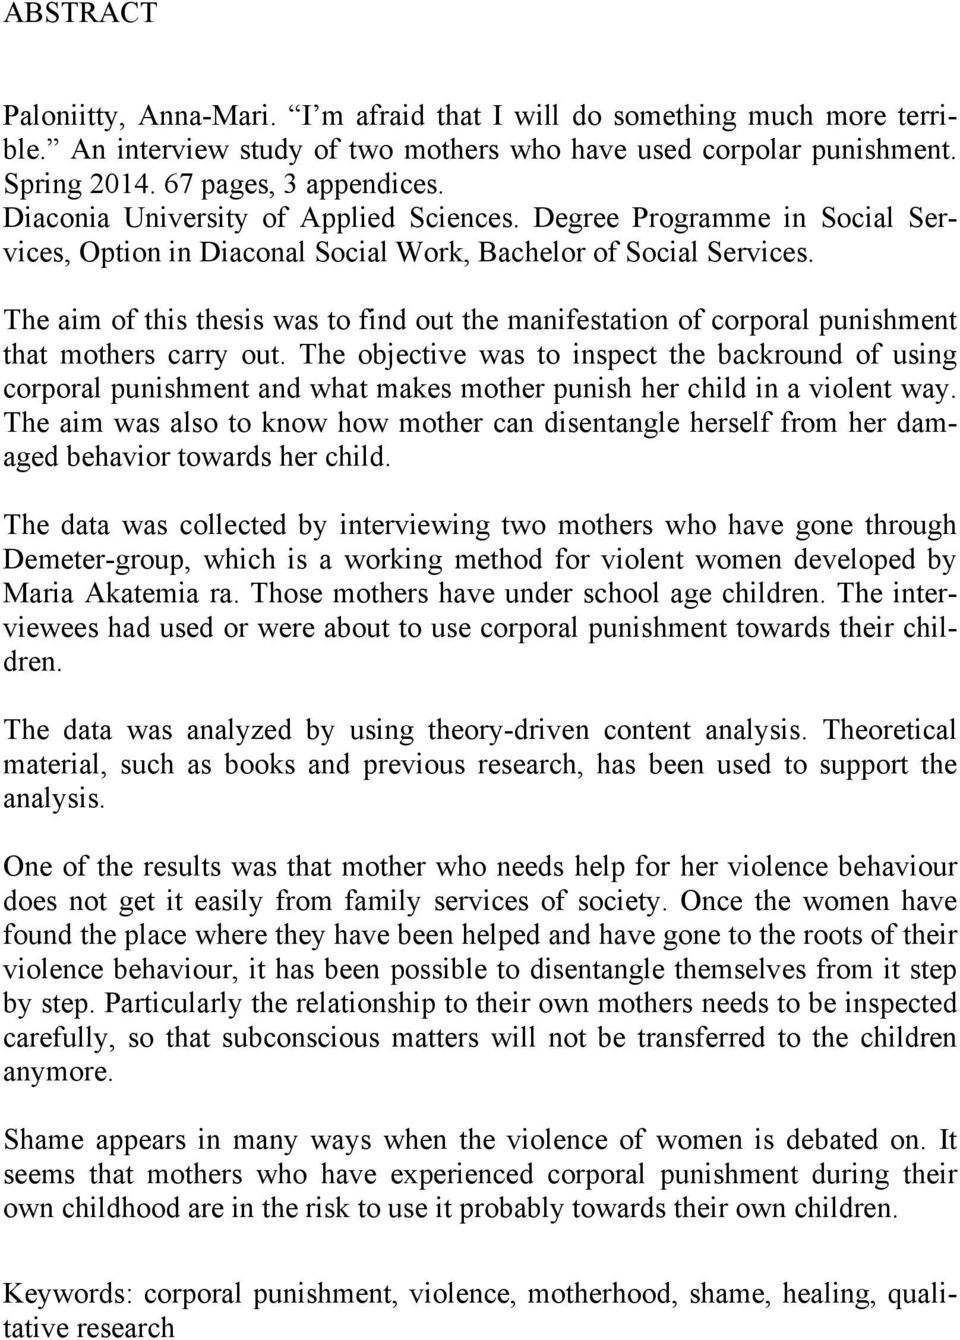 The aim of this thesis was to find out the manifestation of corporal punishment that mothers carry out.